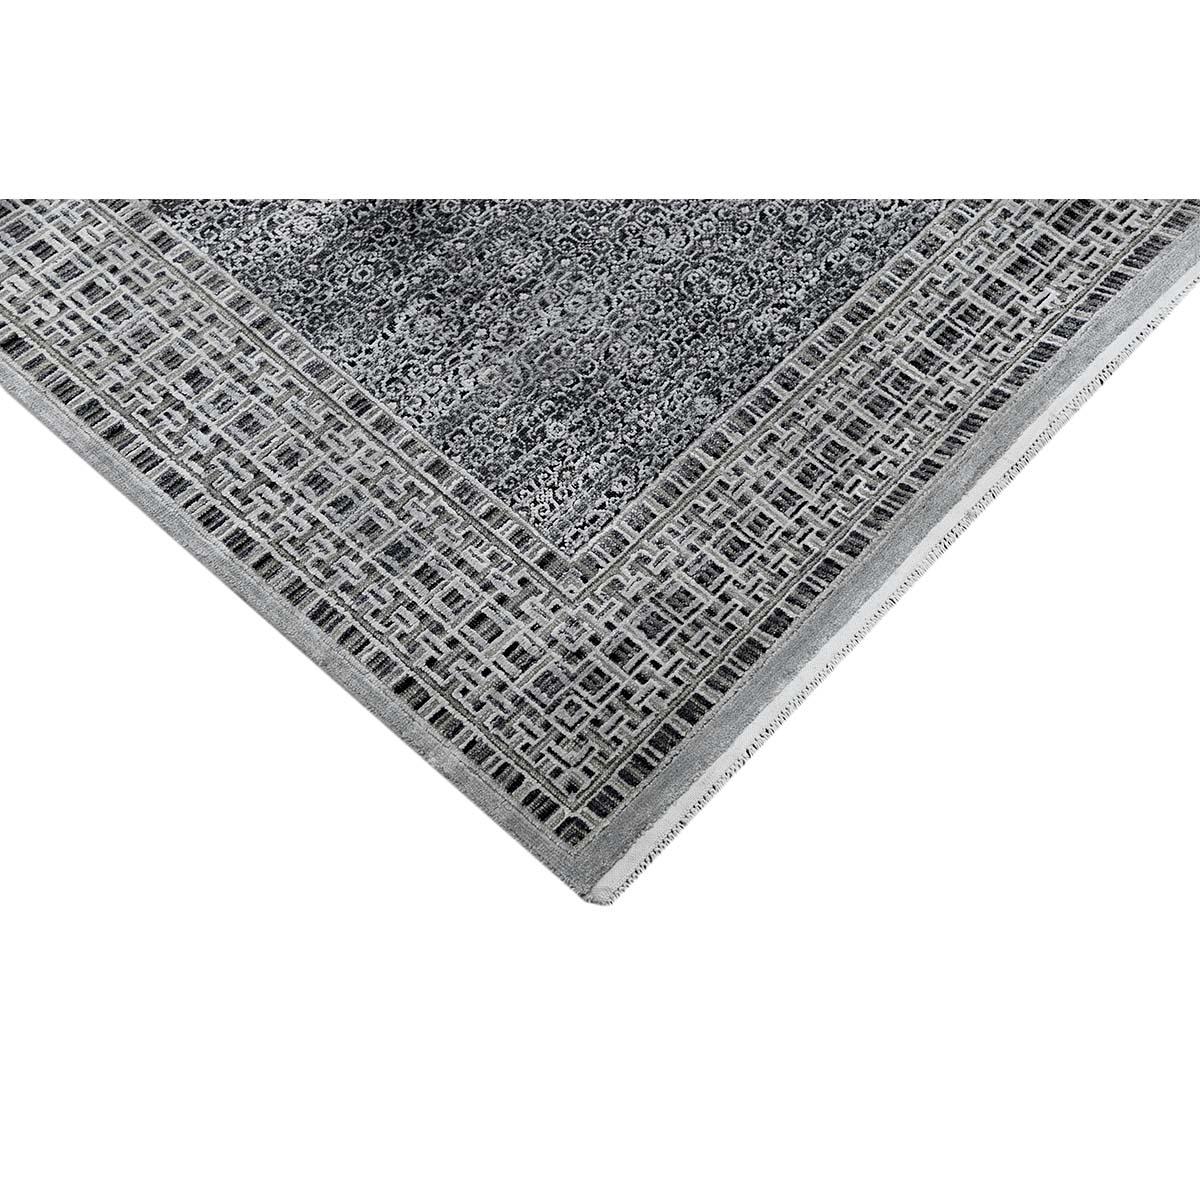 Hand Woven Luxury Charcoal / Silver Area Rug In New Condition For Sale In Secaucus, NJ